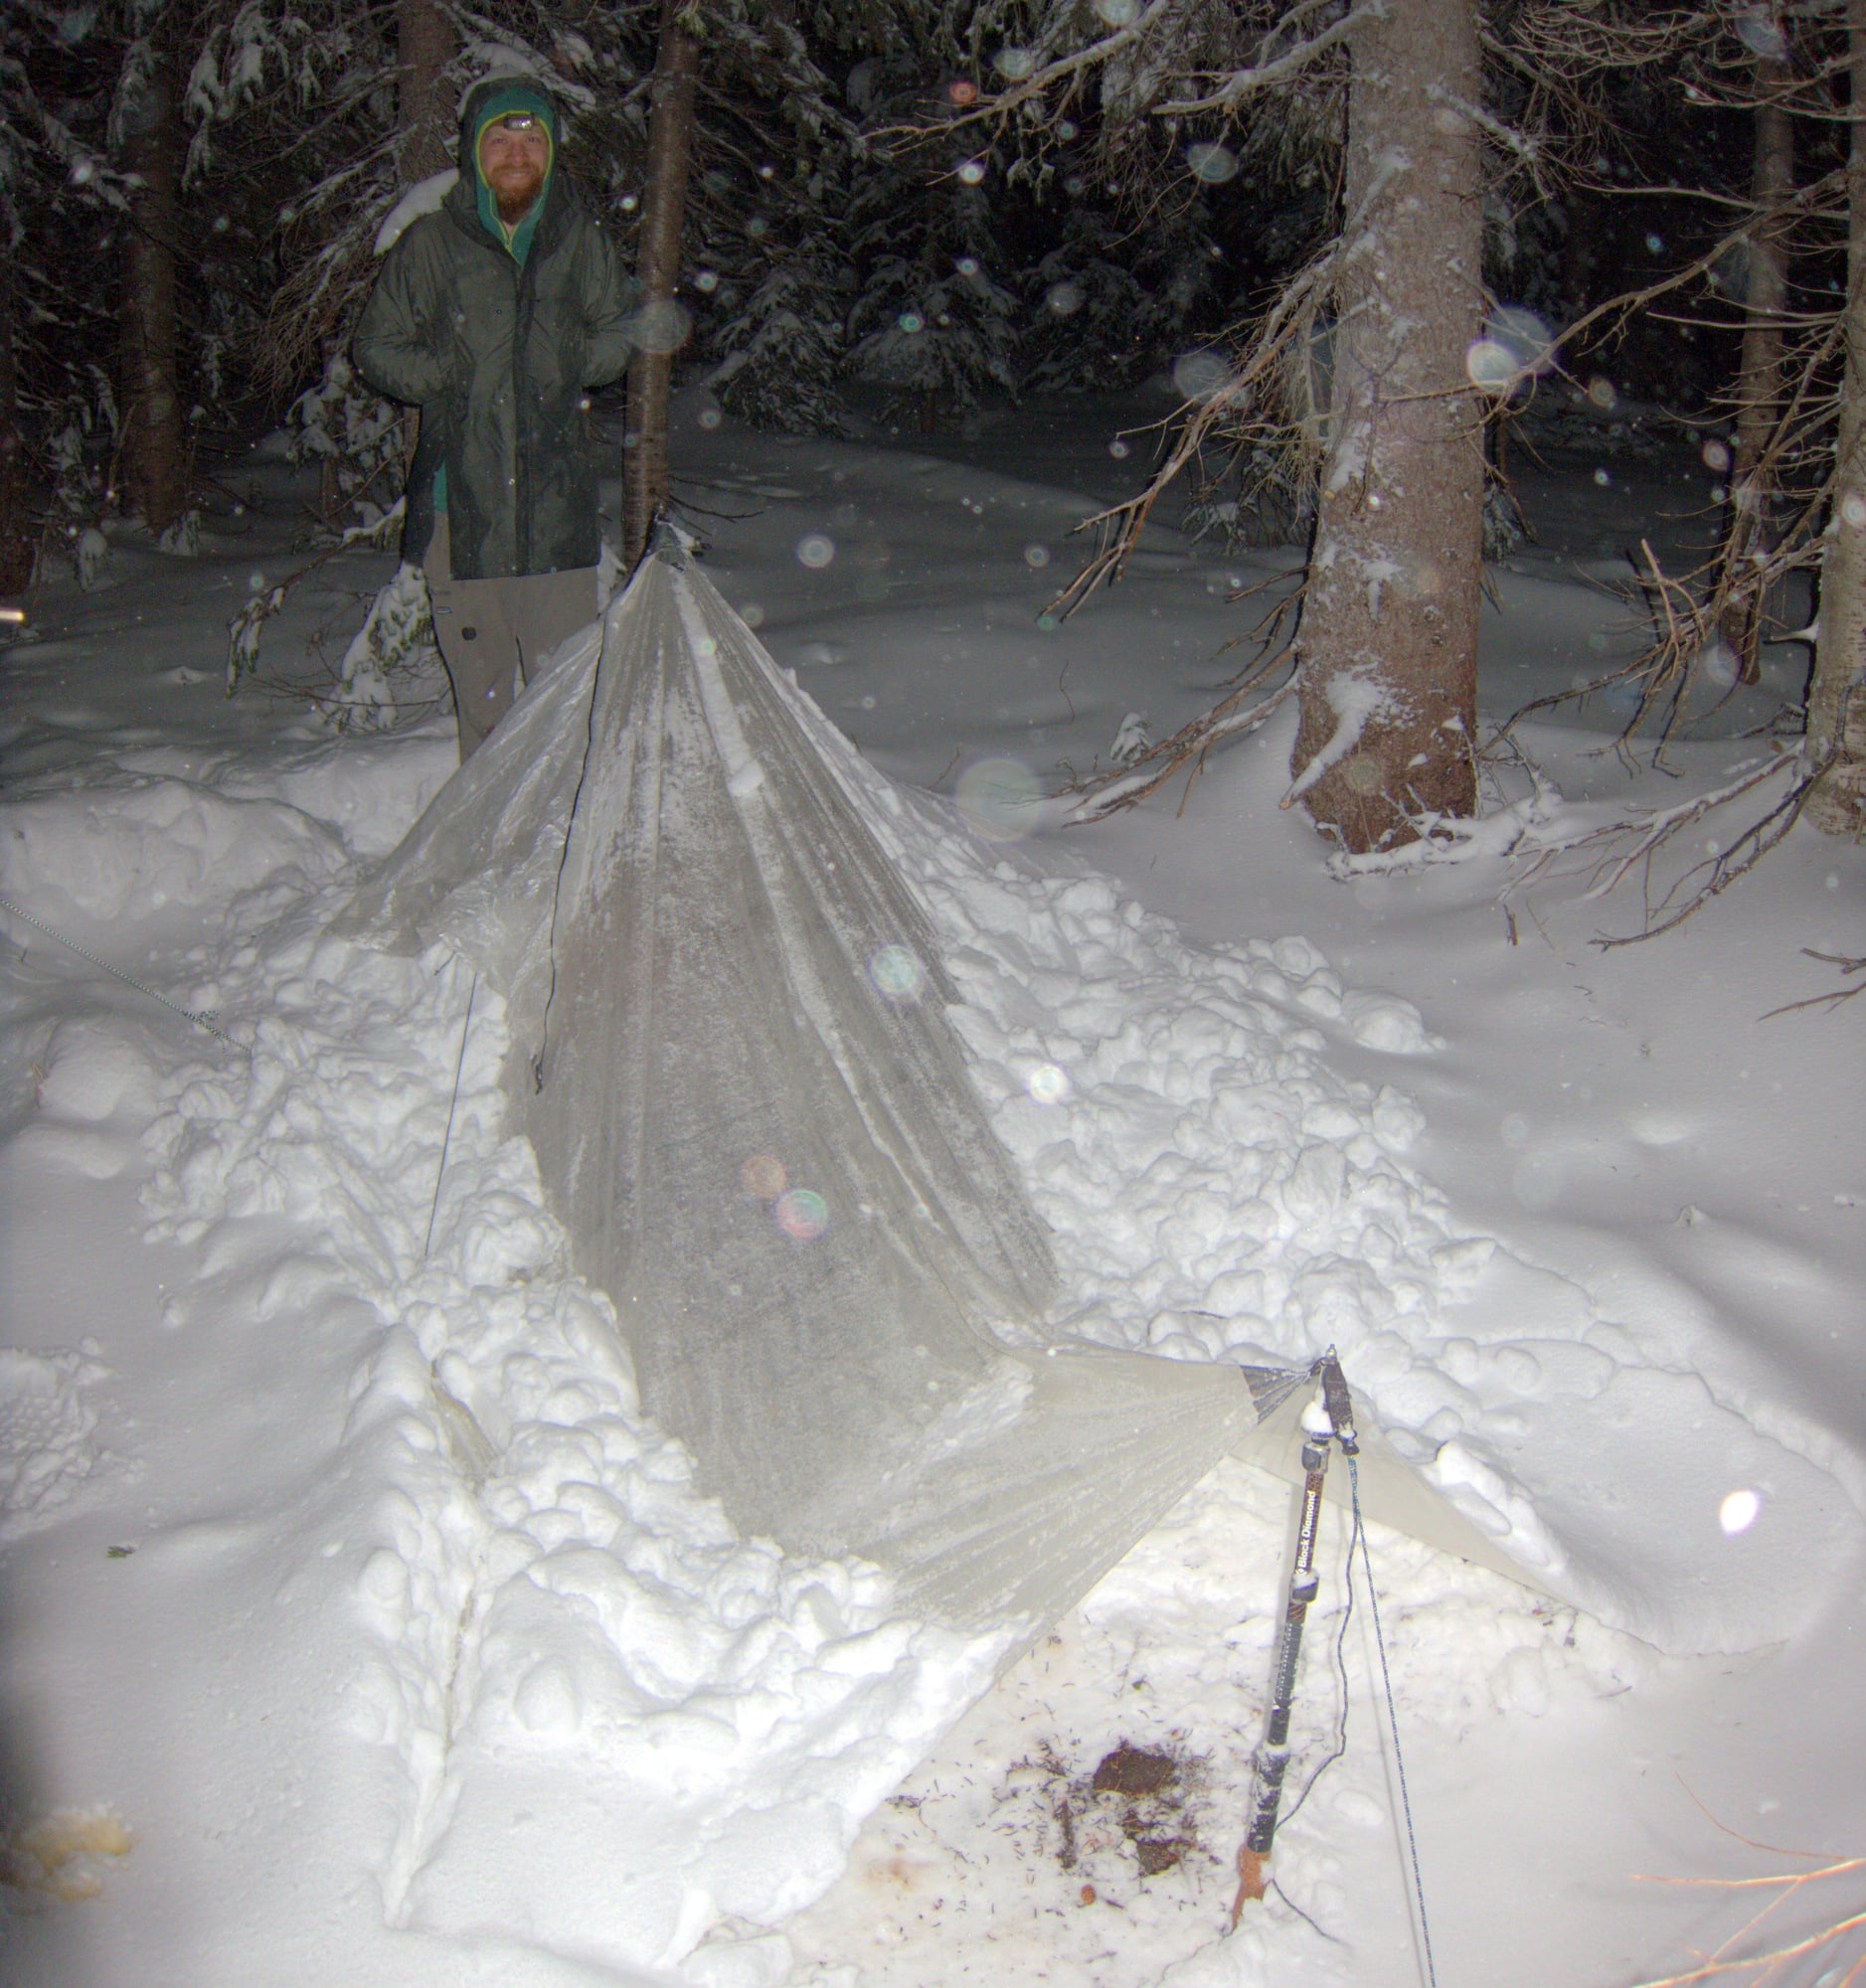 Noel's A-frame tarp after a 4-inch storm